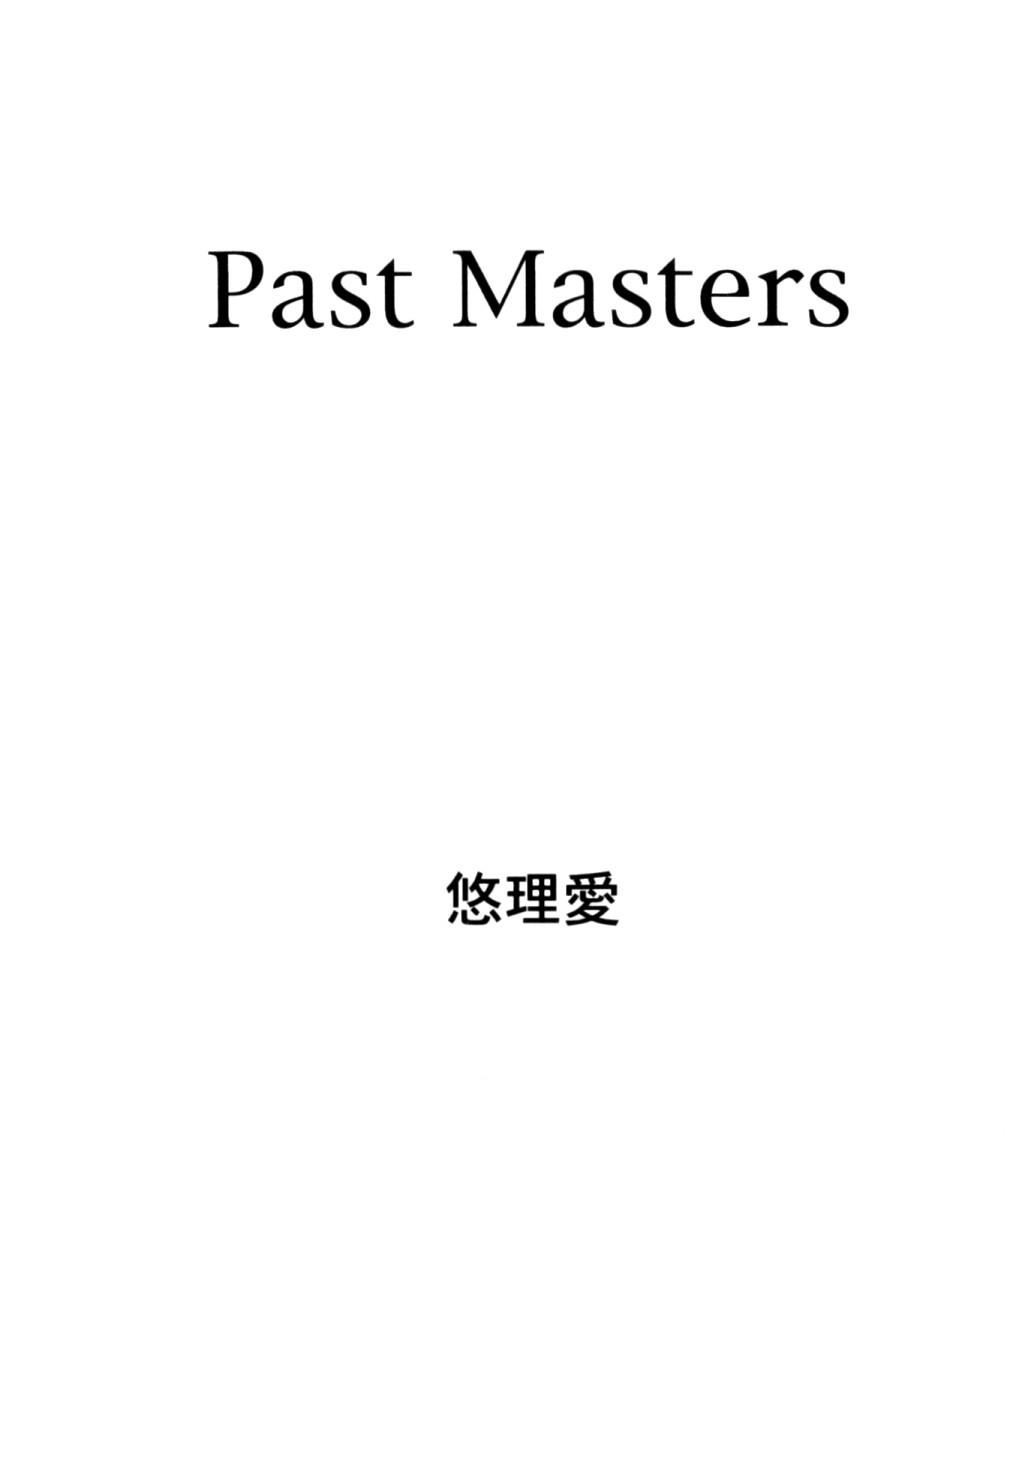 PAST MASTERS 2